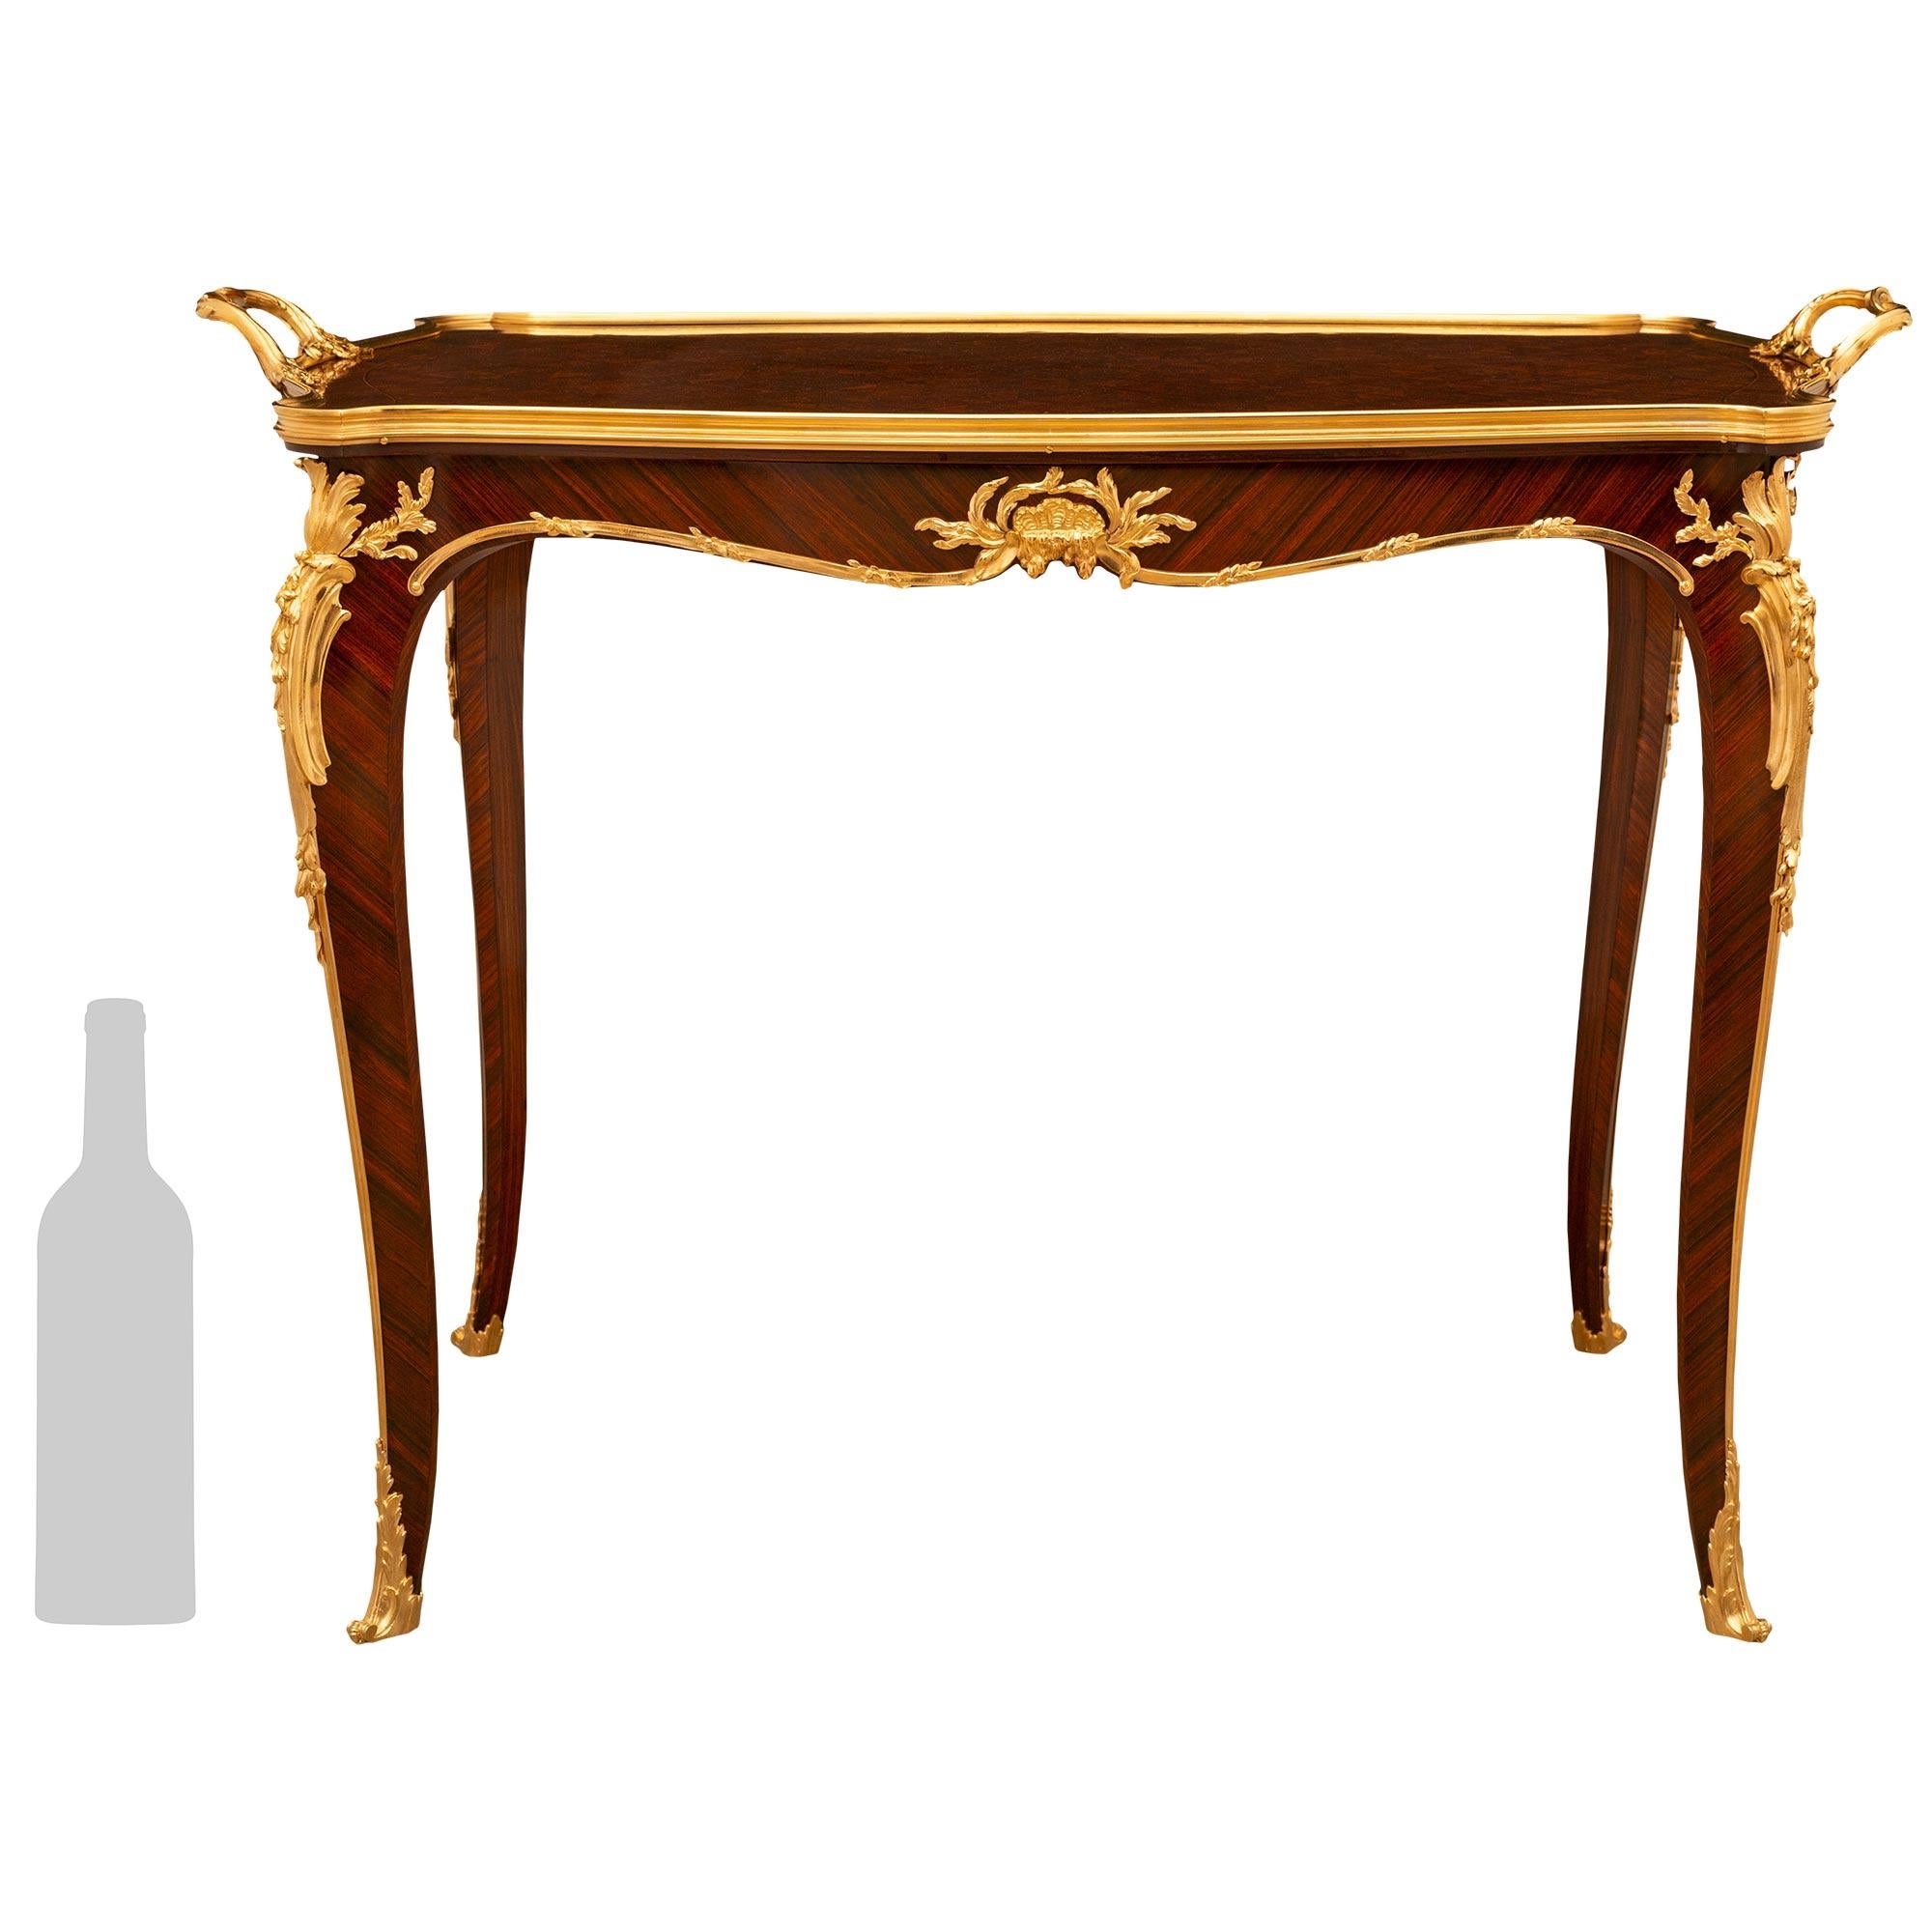 


A very high quality and most attractive French 19th century Louis XV st. Belle Epoque period Kingwood and Ormolu coffee table attributed to Francois Linke. The table is raised by elegant slender tapering cabriole legs decorated by a top foliate